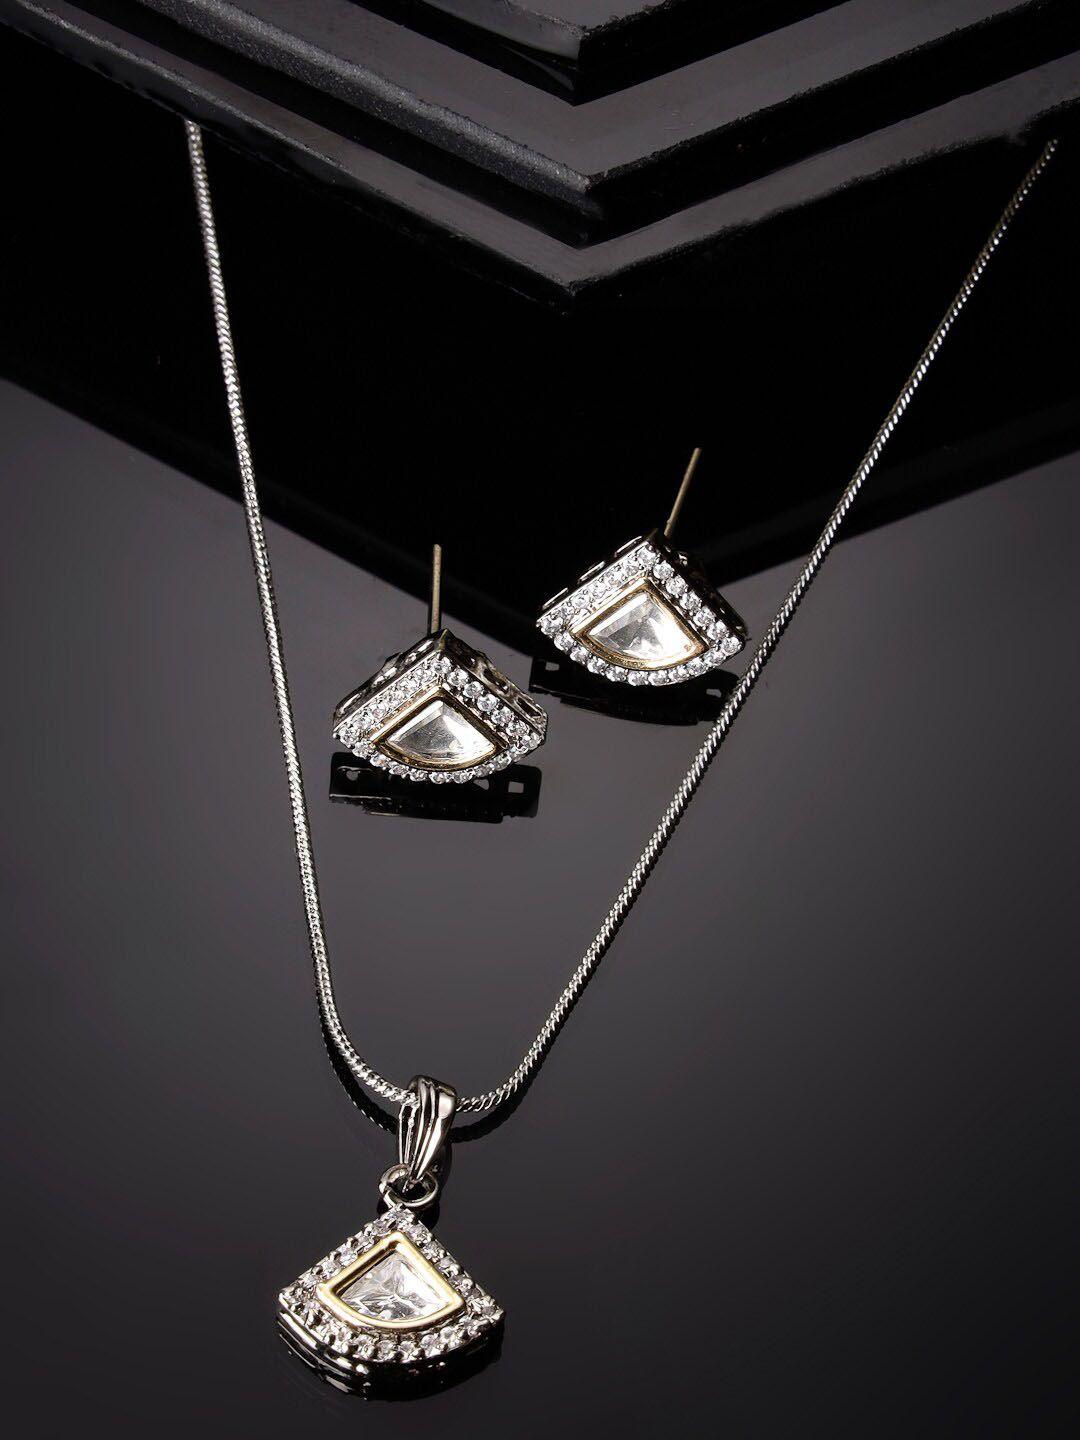 adiva silver-plated american diamond studded pendant with chain & earrings